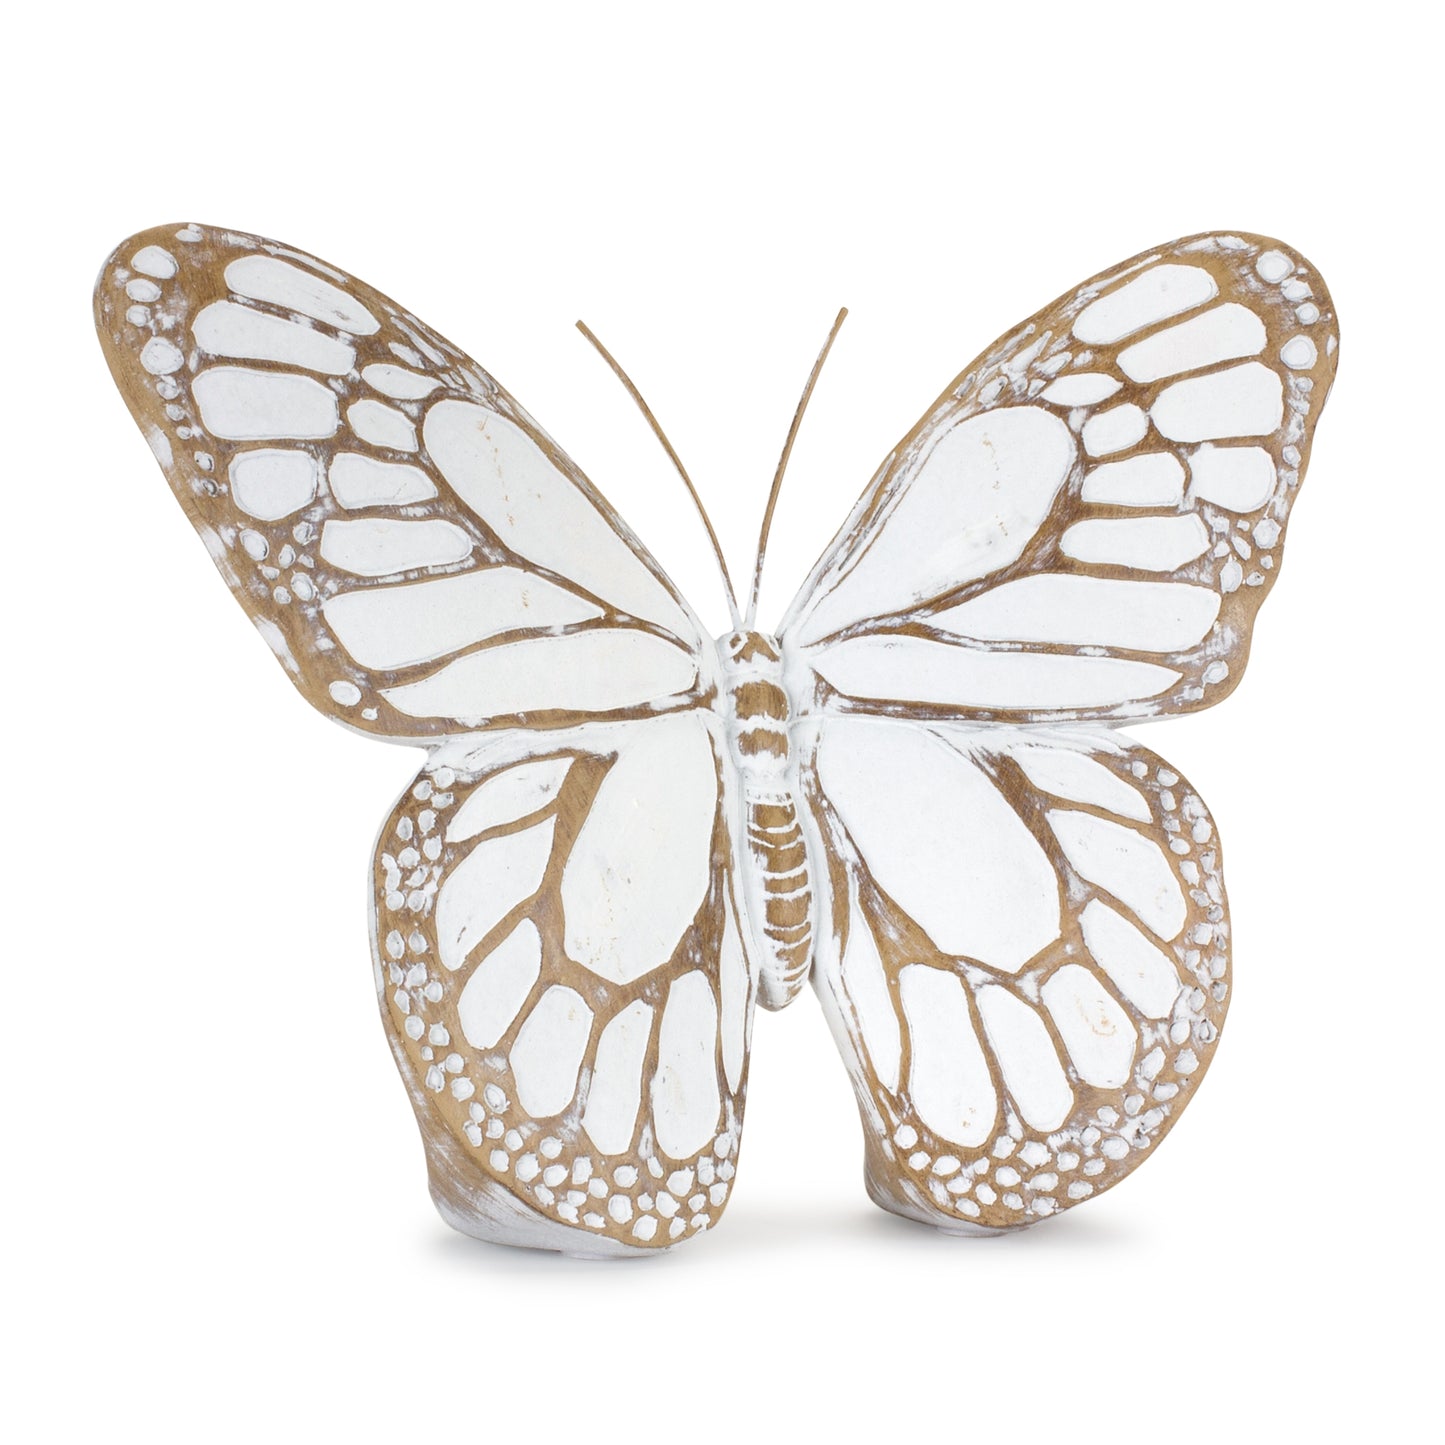 Butterfly Figurines - Set of 3